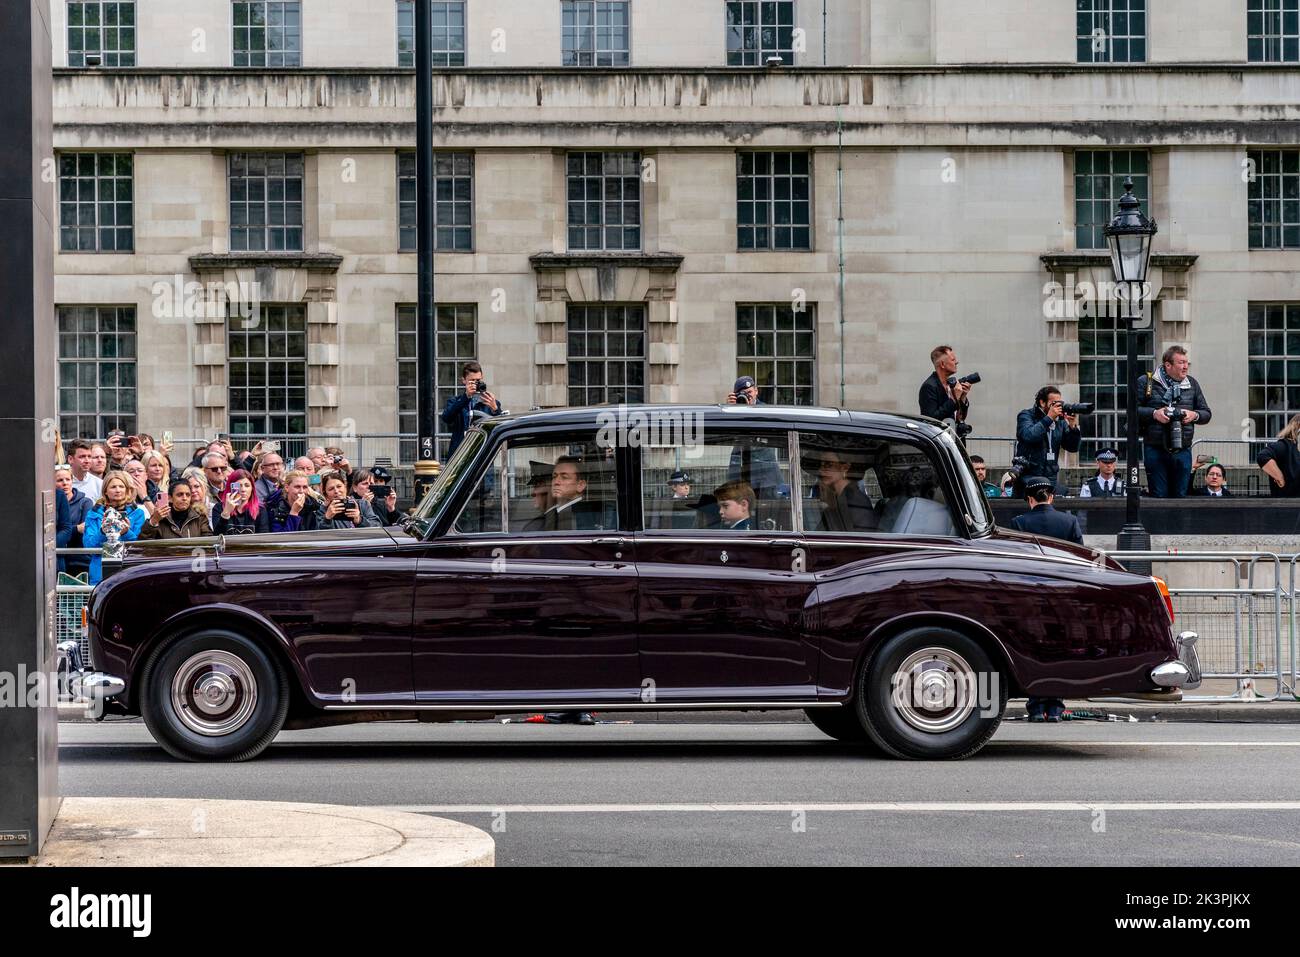 The Royal Car With The Princess of Wales and Prince George Follows The Coffin Of Queen Elizabeth II, The Funeral Procession, Whitehall, London. Stock Photo